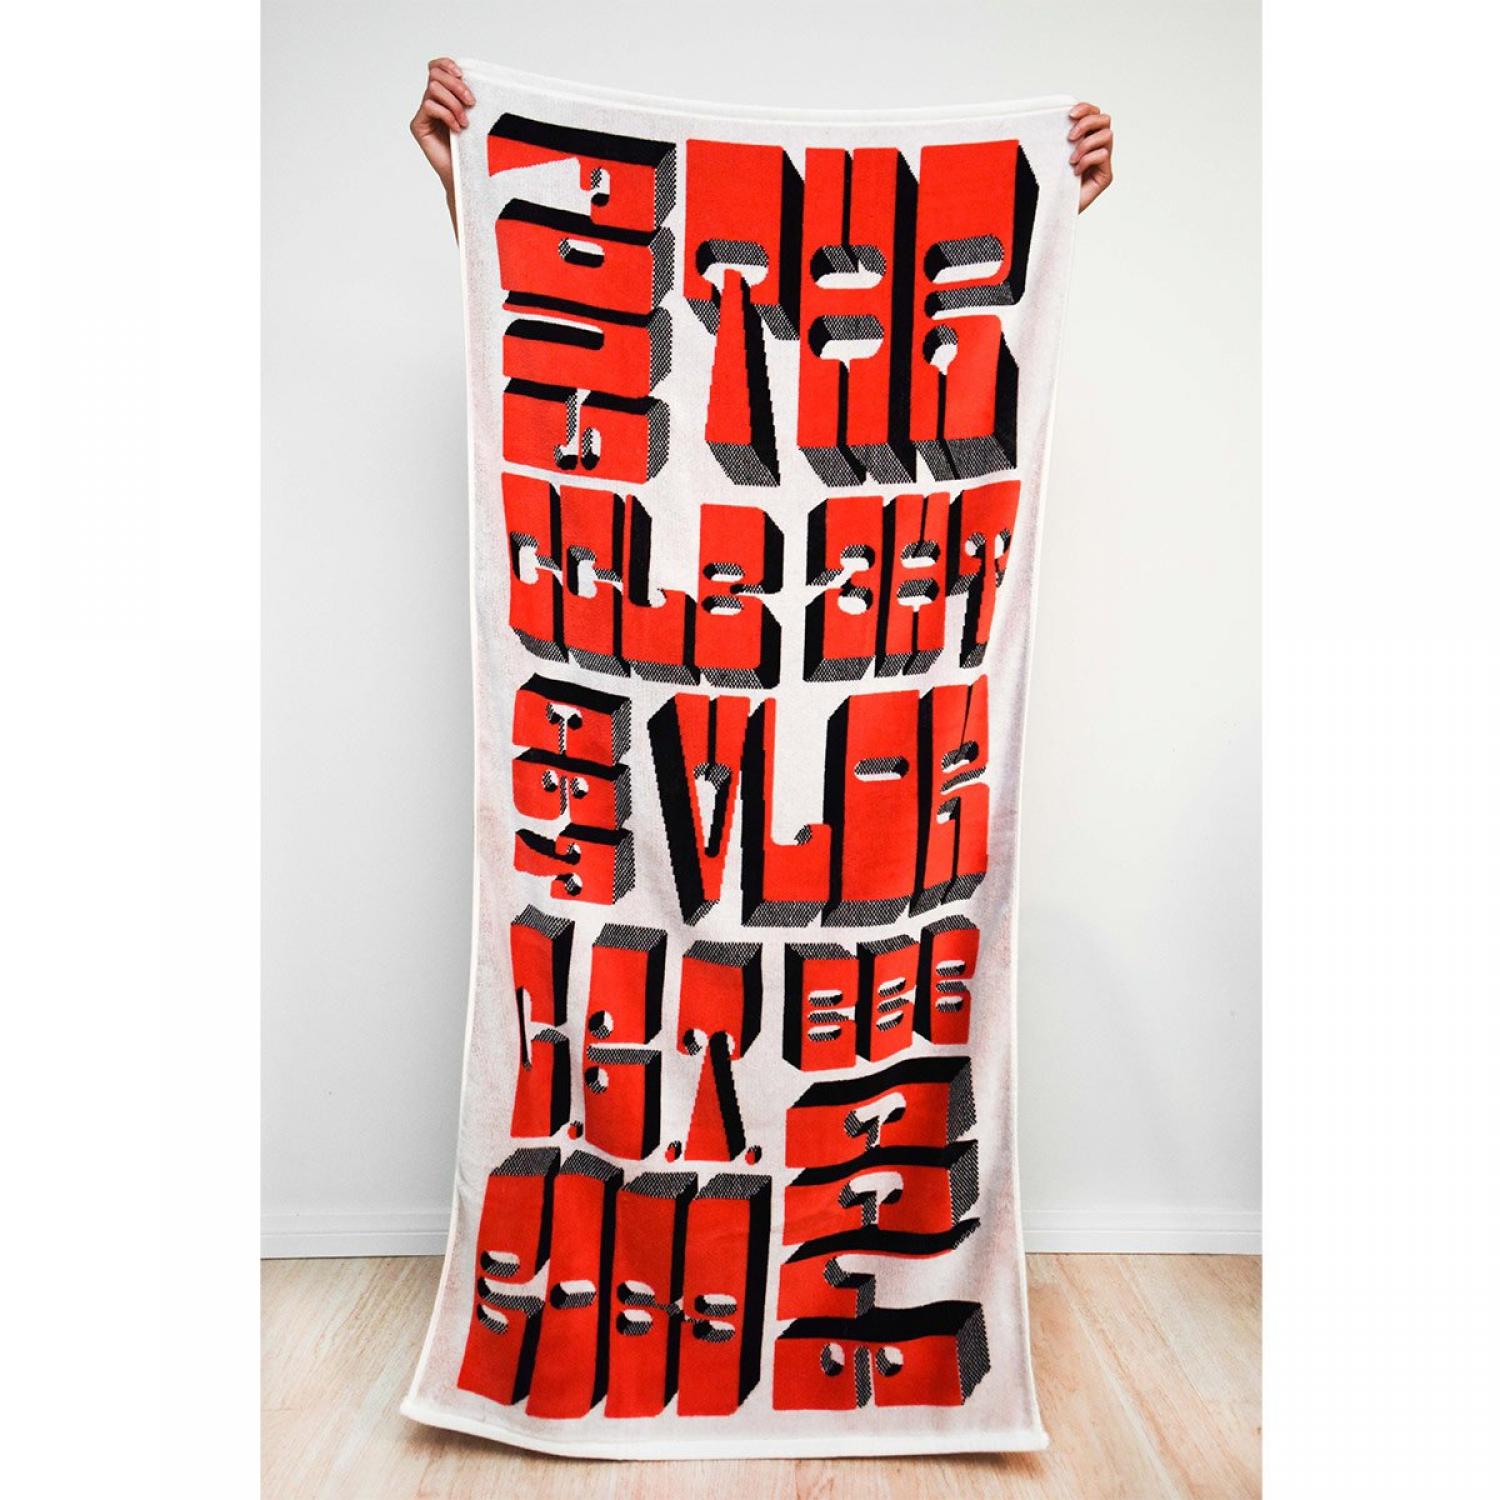 Limited Edition Barry McGee Towel - Red & White Version